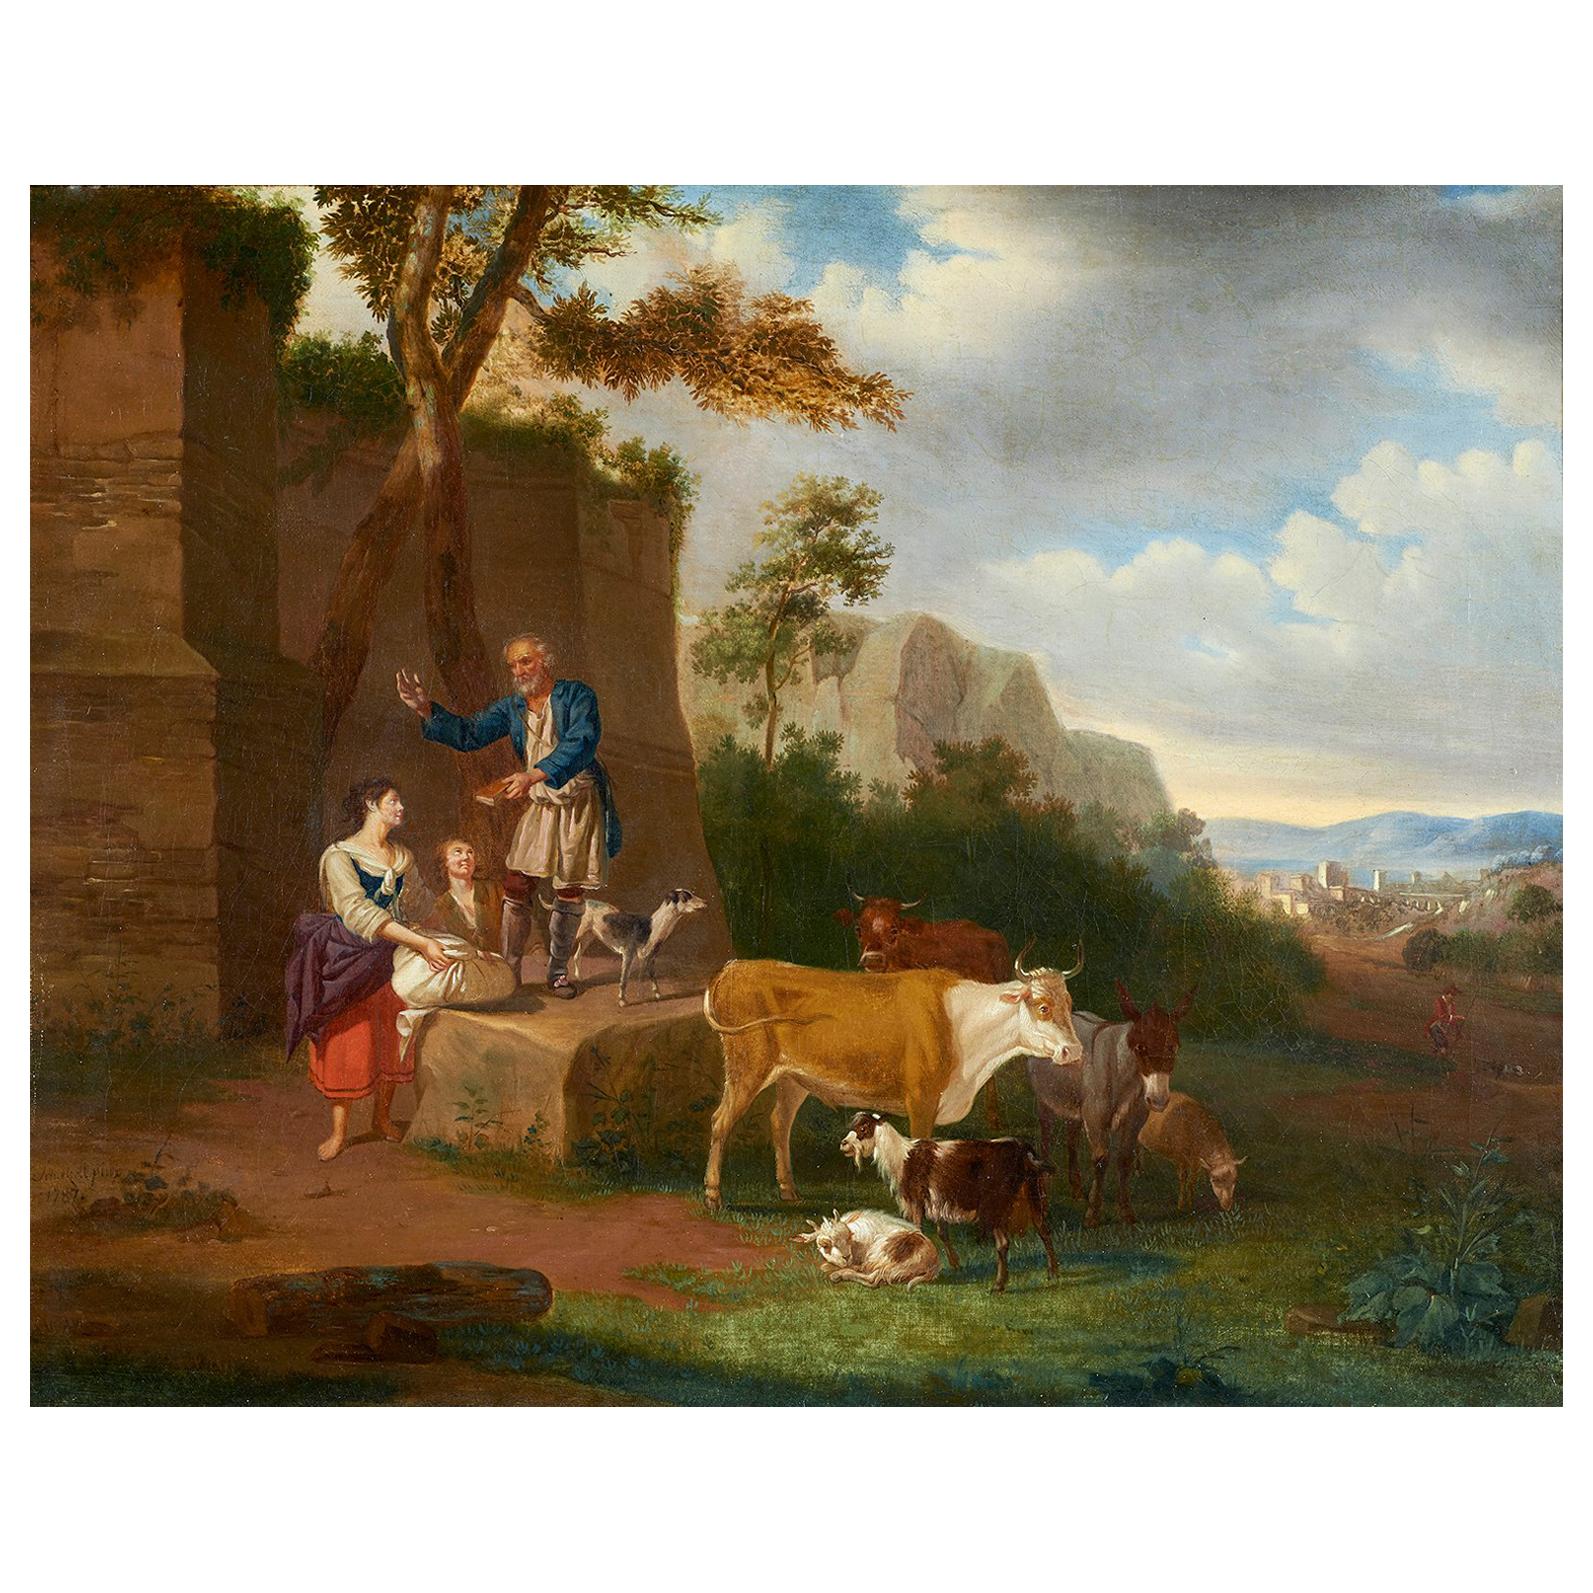 Paesaggio 18th Century Oil on Canvas Schaetzell Signed 1783 Landscape Painting